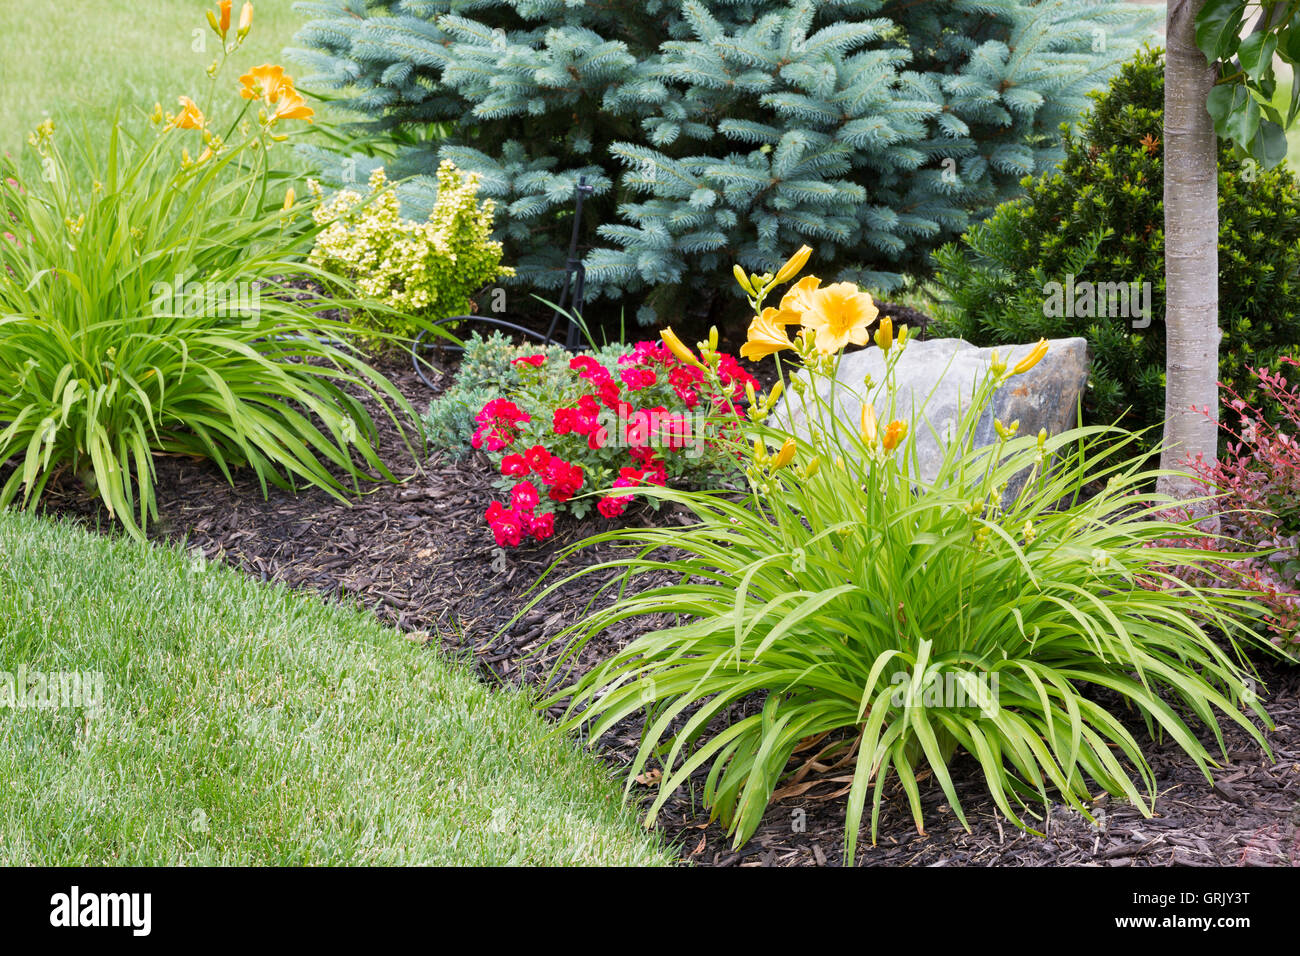 Flowering yellow tiger lilies in a newly landscaped ornamental flowerbed with colorful red flowers and evergreen trees Stock Photo